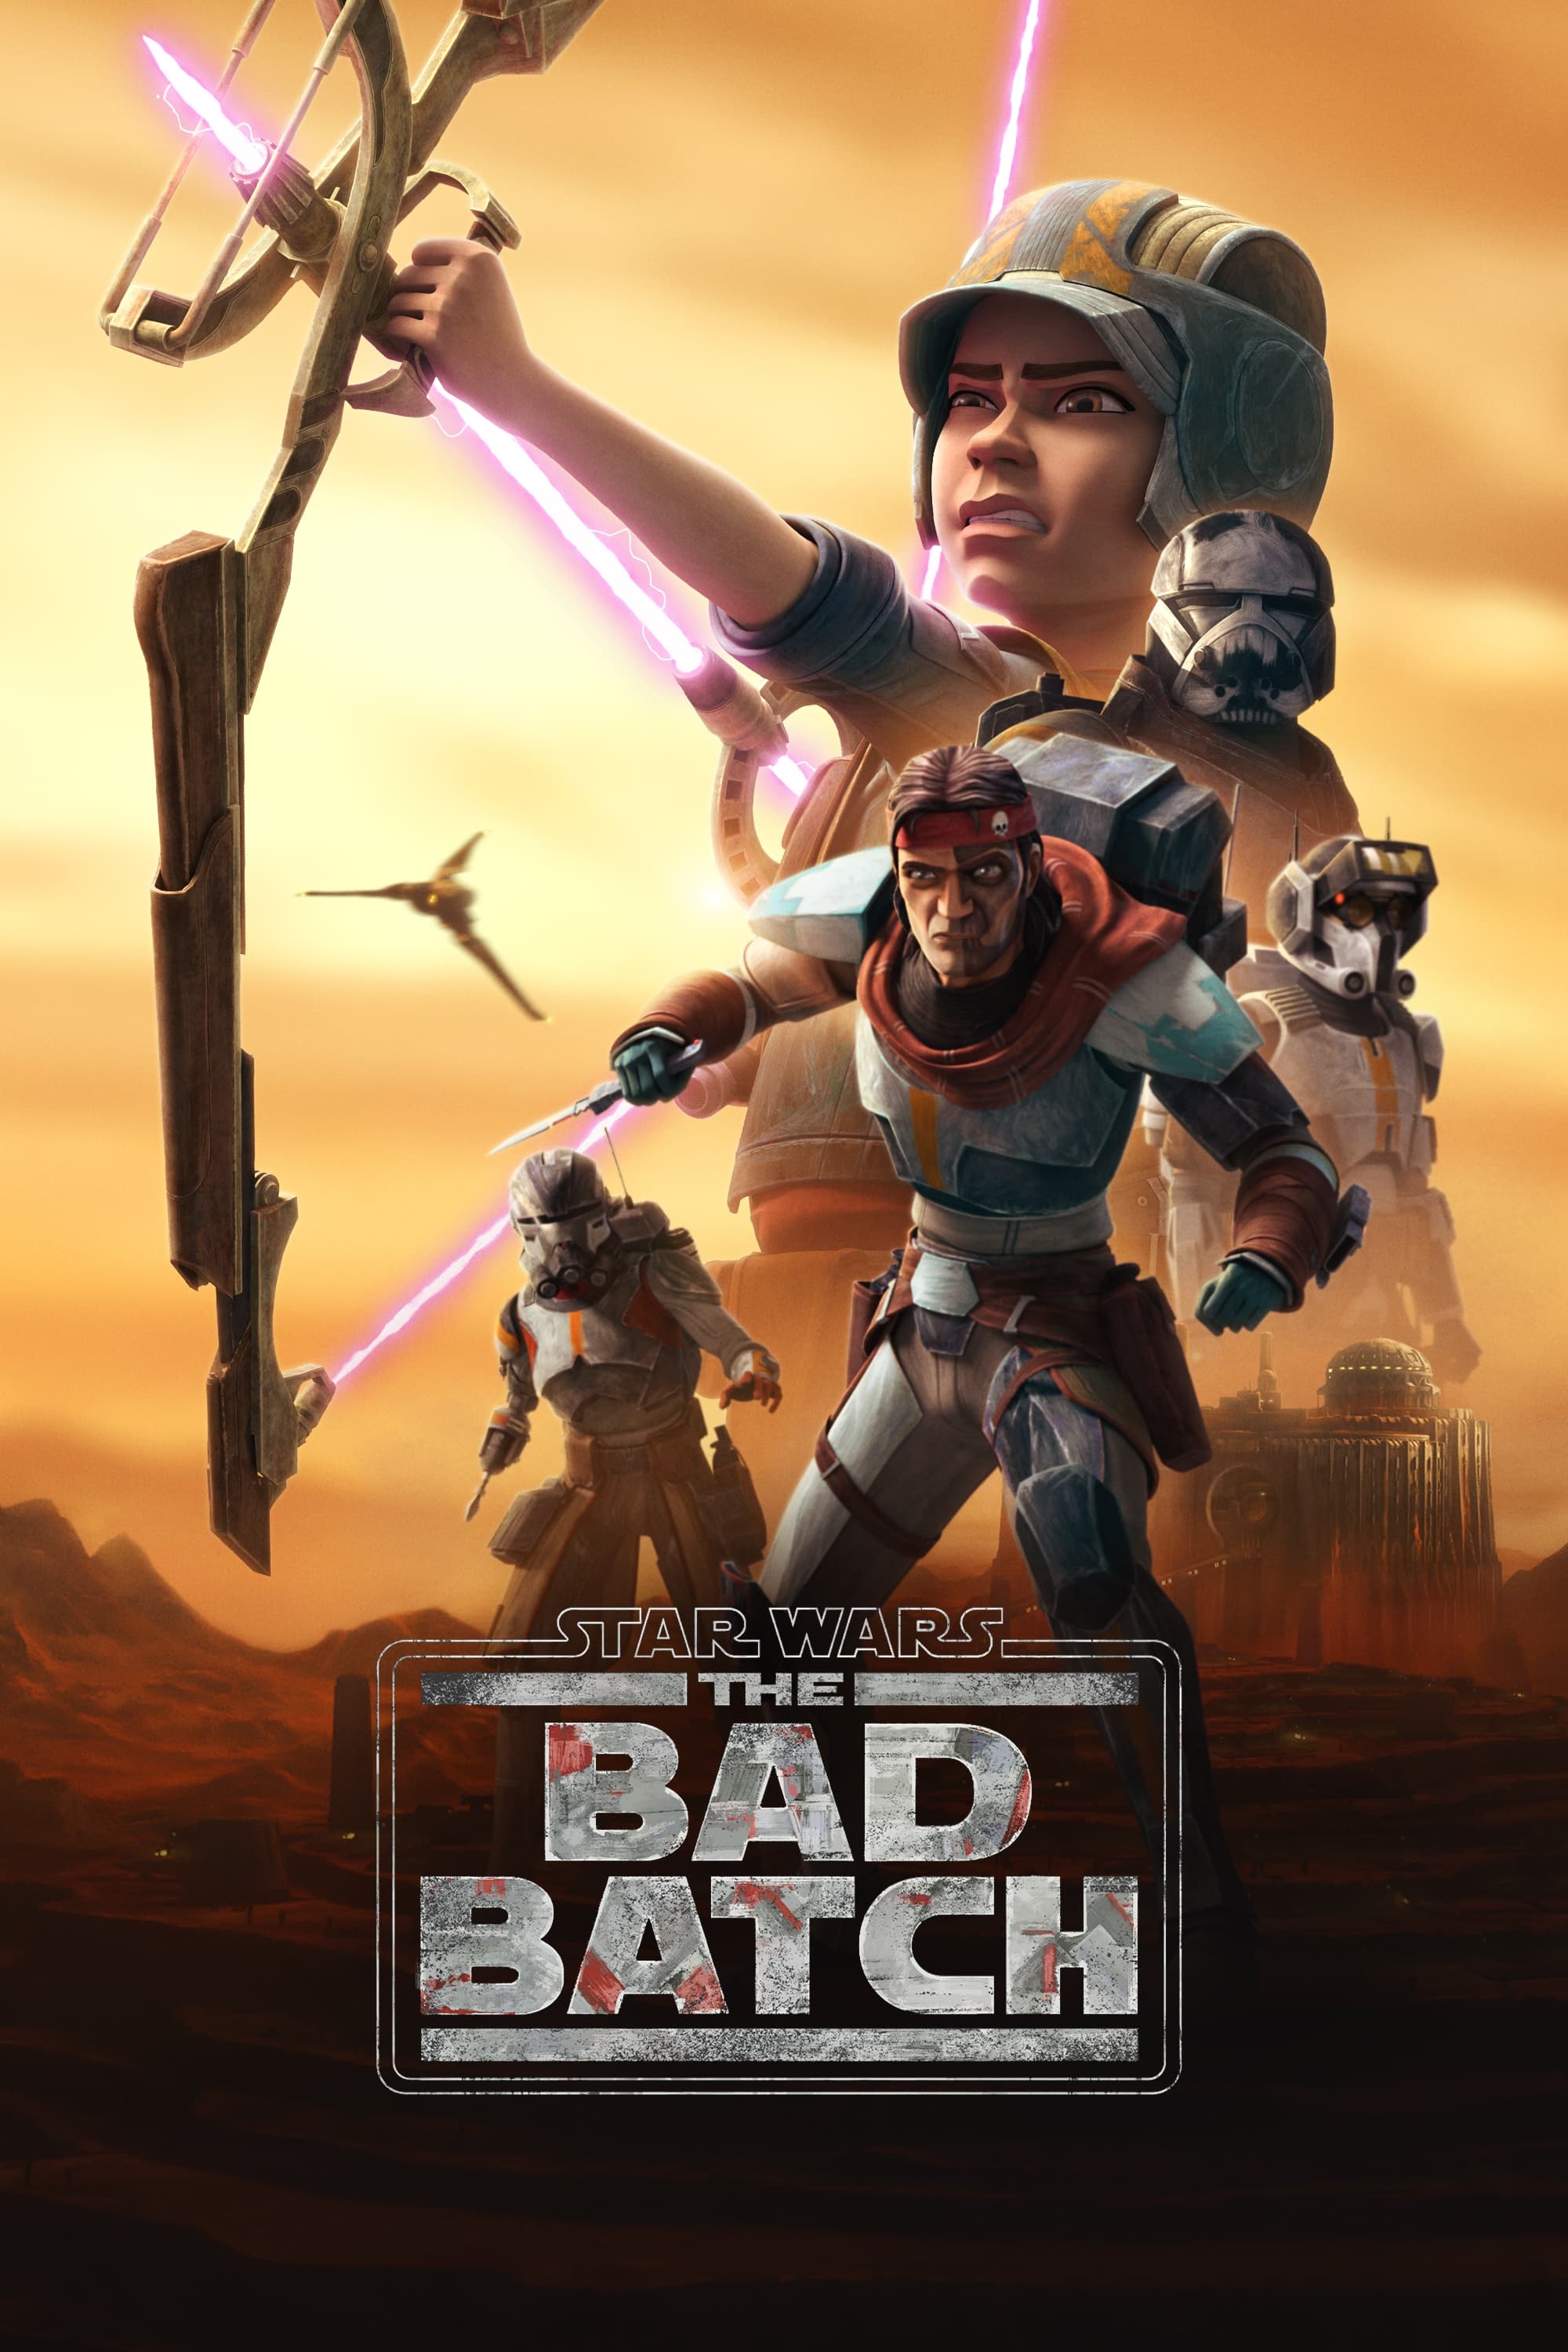 Star Wars: The Bad Batch TV Shows About Clone